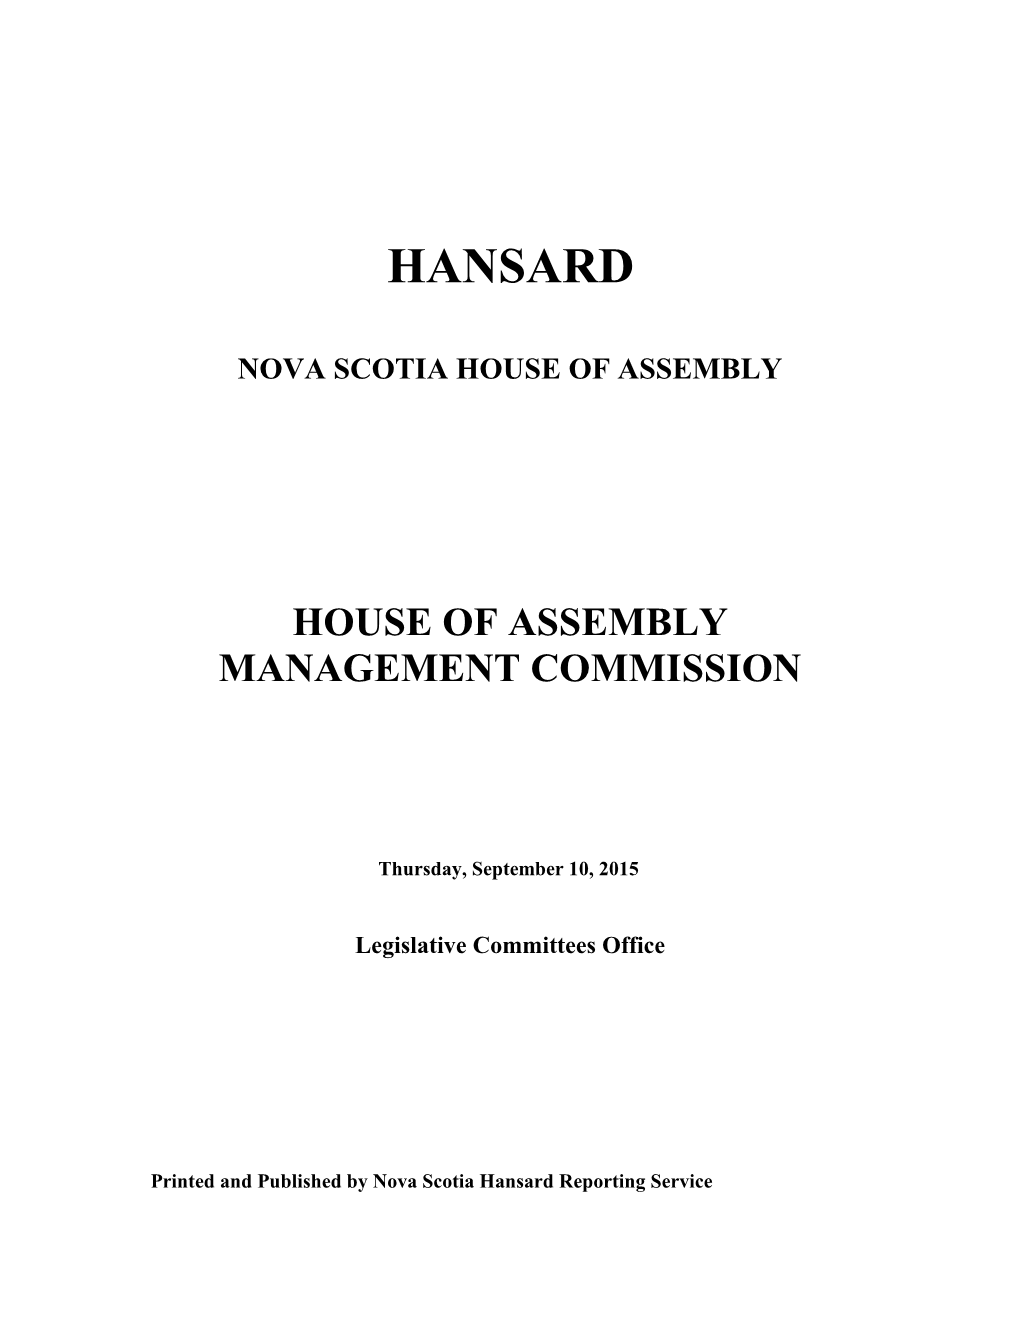 House of Assembly Management Commission